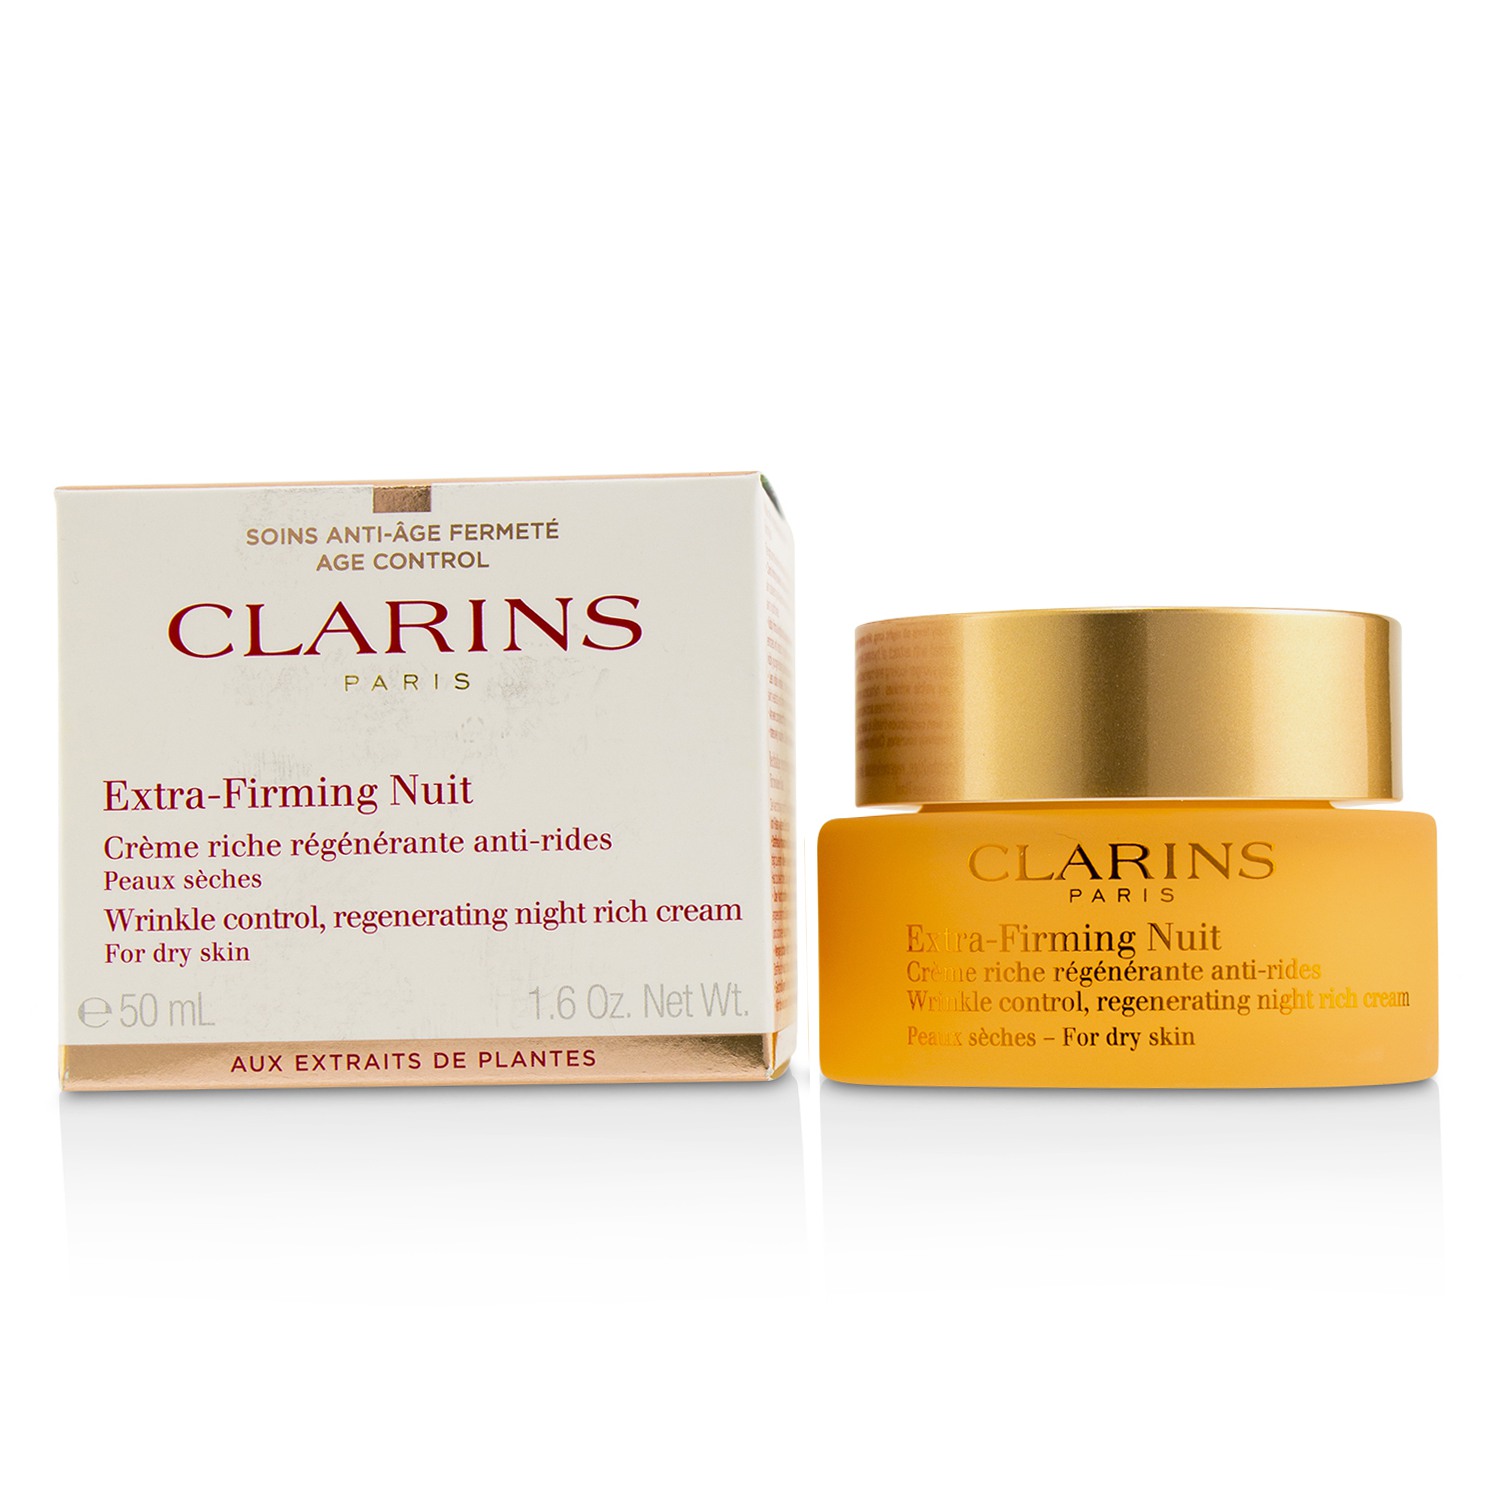 Extra-Firming Nuit Wrinkle Control Regenerating Night Rich Cream - For Dry Skin Clarins Image